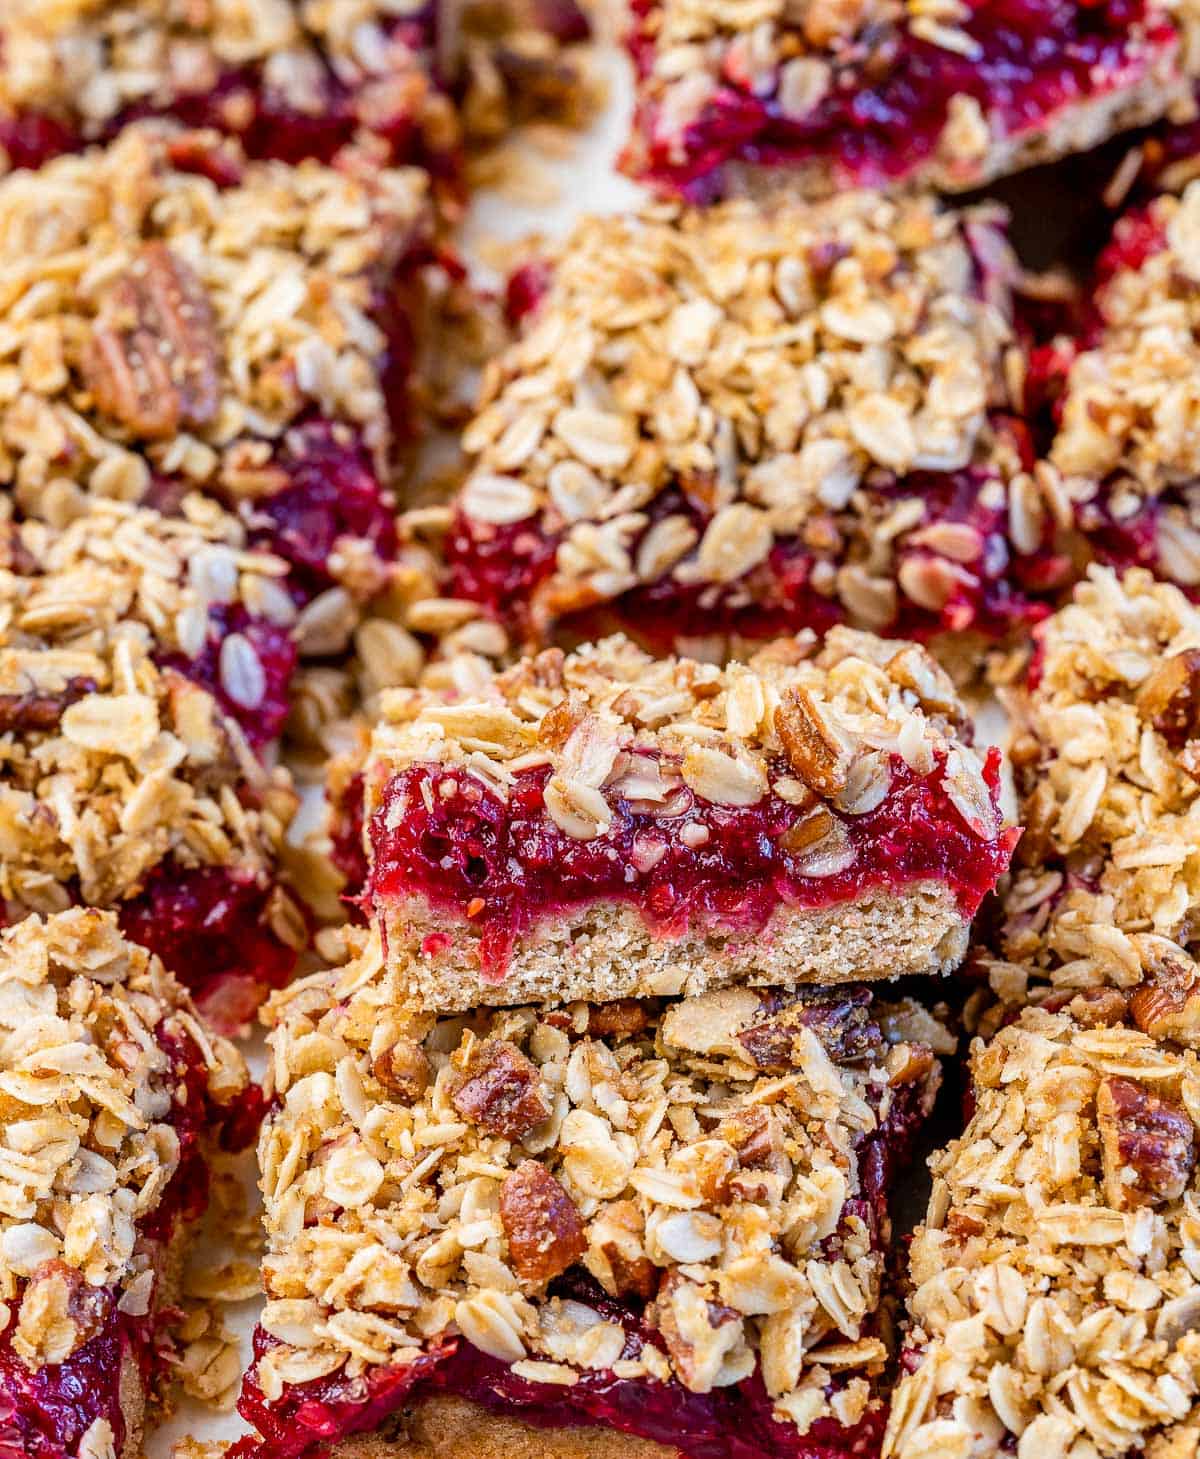 Cranberry bars with a pecan crumble topping.